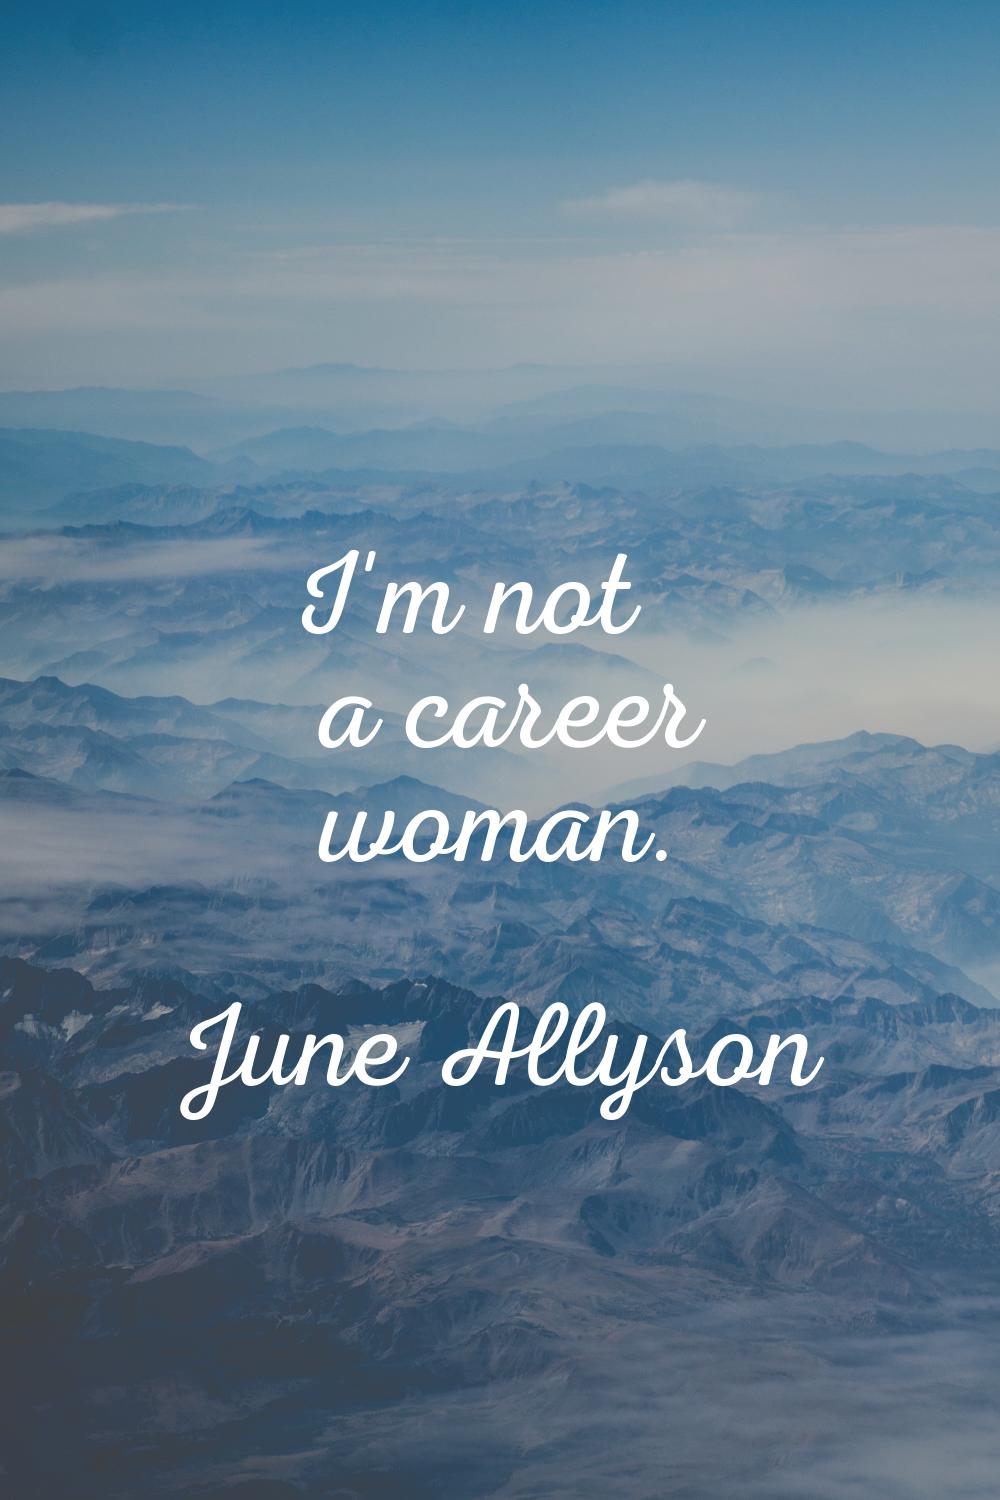 I'm not a career woman.